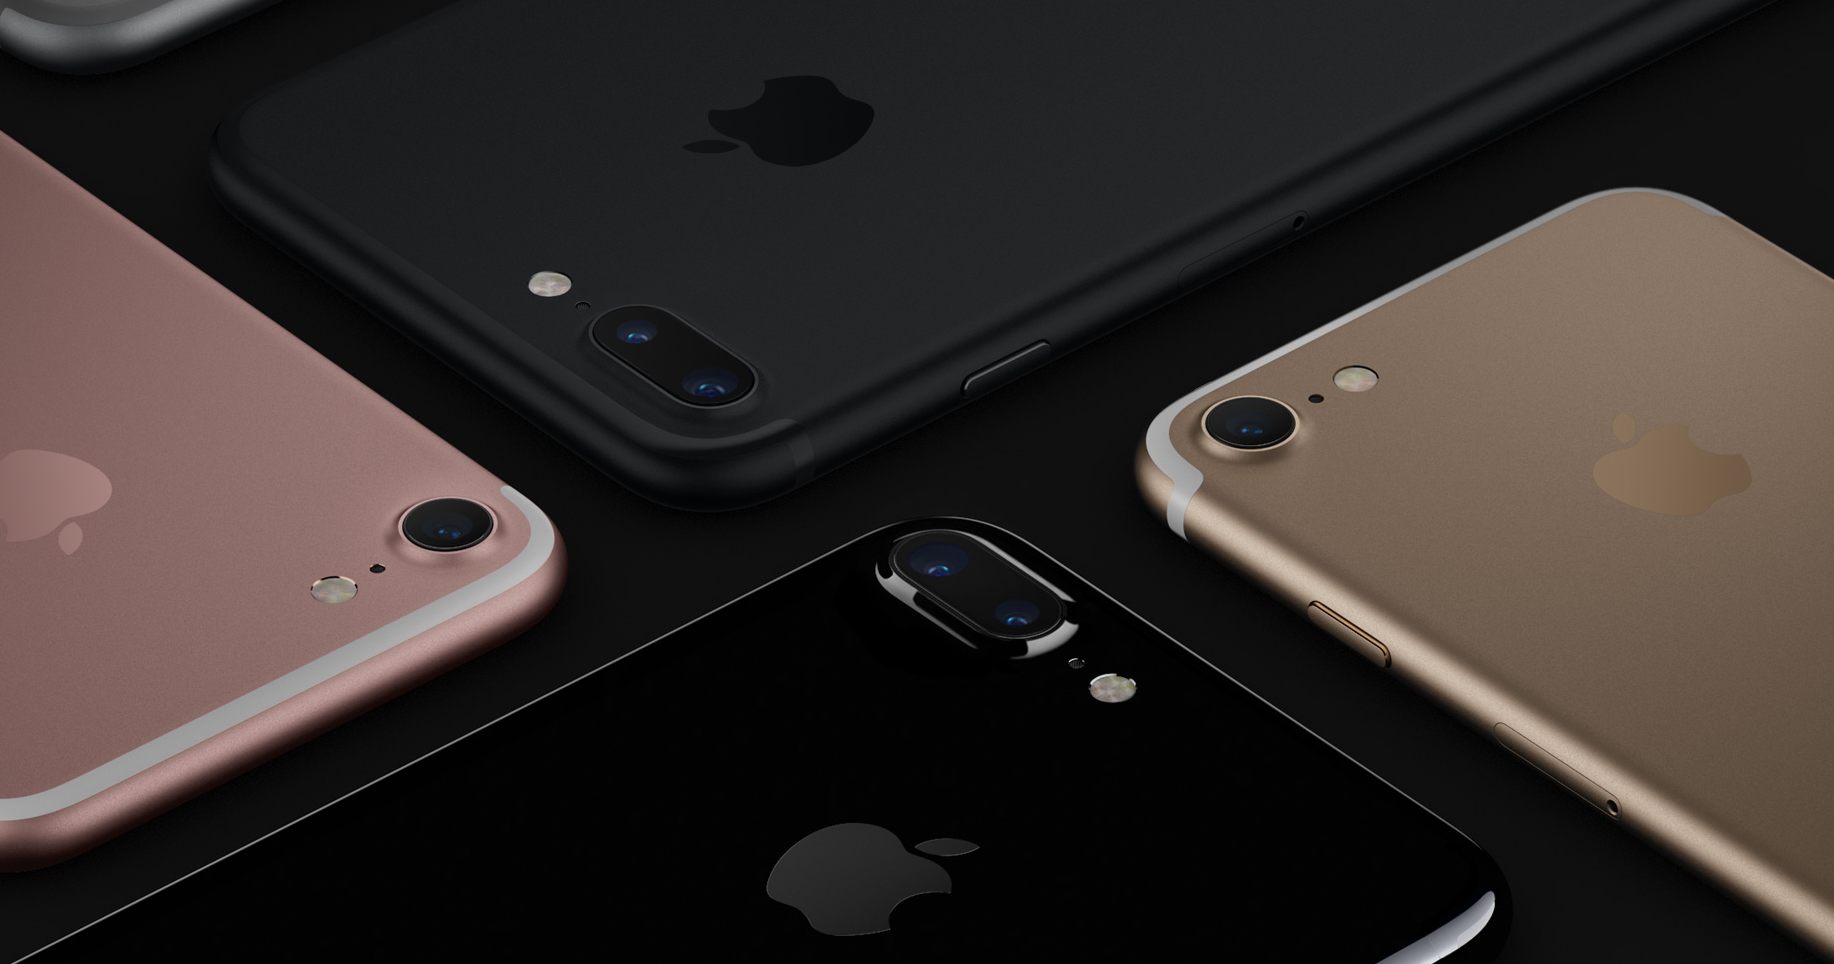 Apple has released a brand new jet black glossy finish to its iPhone color selection